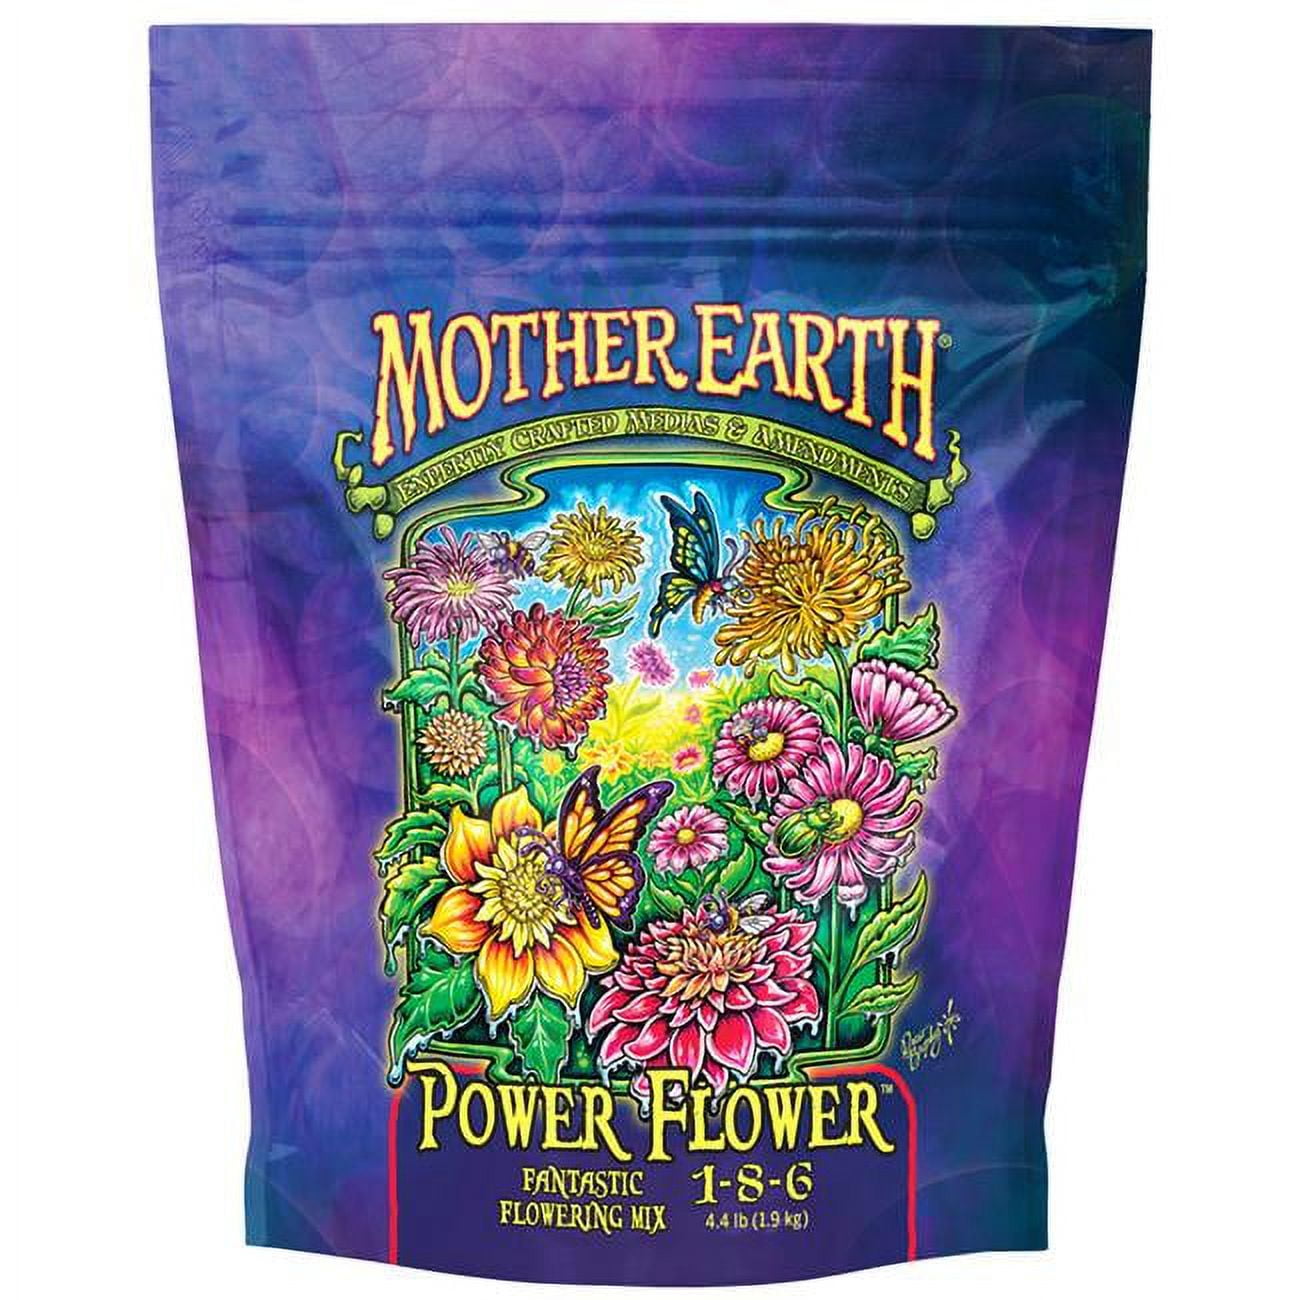 Picture of Mother Earth 7004439 4.4 lbs Power Flower Fantastic Flowering Mix 1-8-6 Hydroponic Plant Supplement